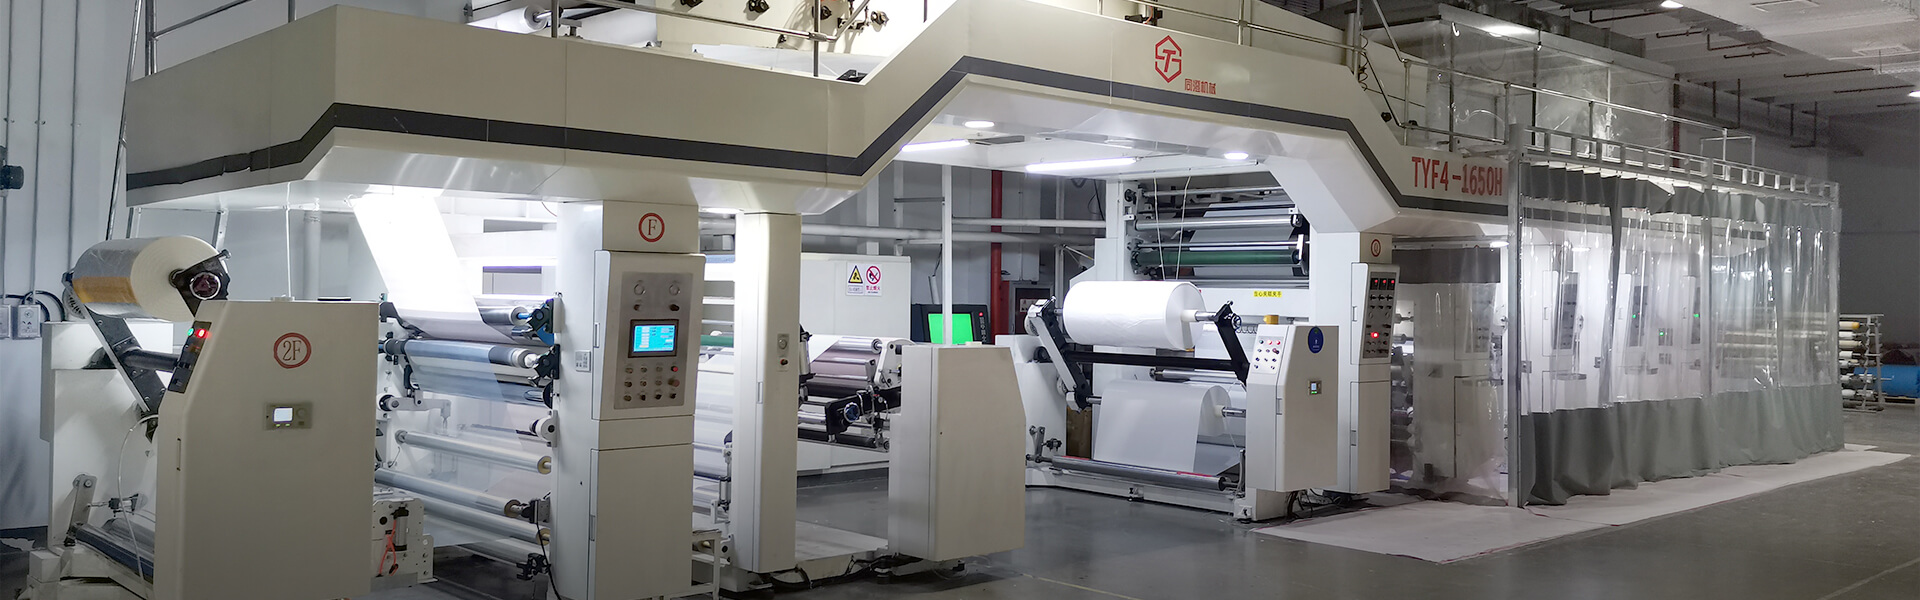 Printing-Compound-Production-Line